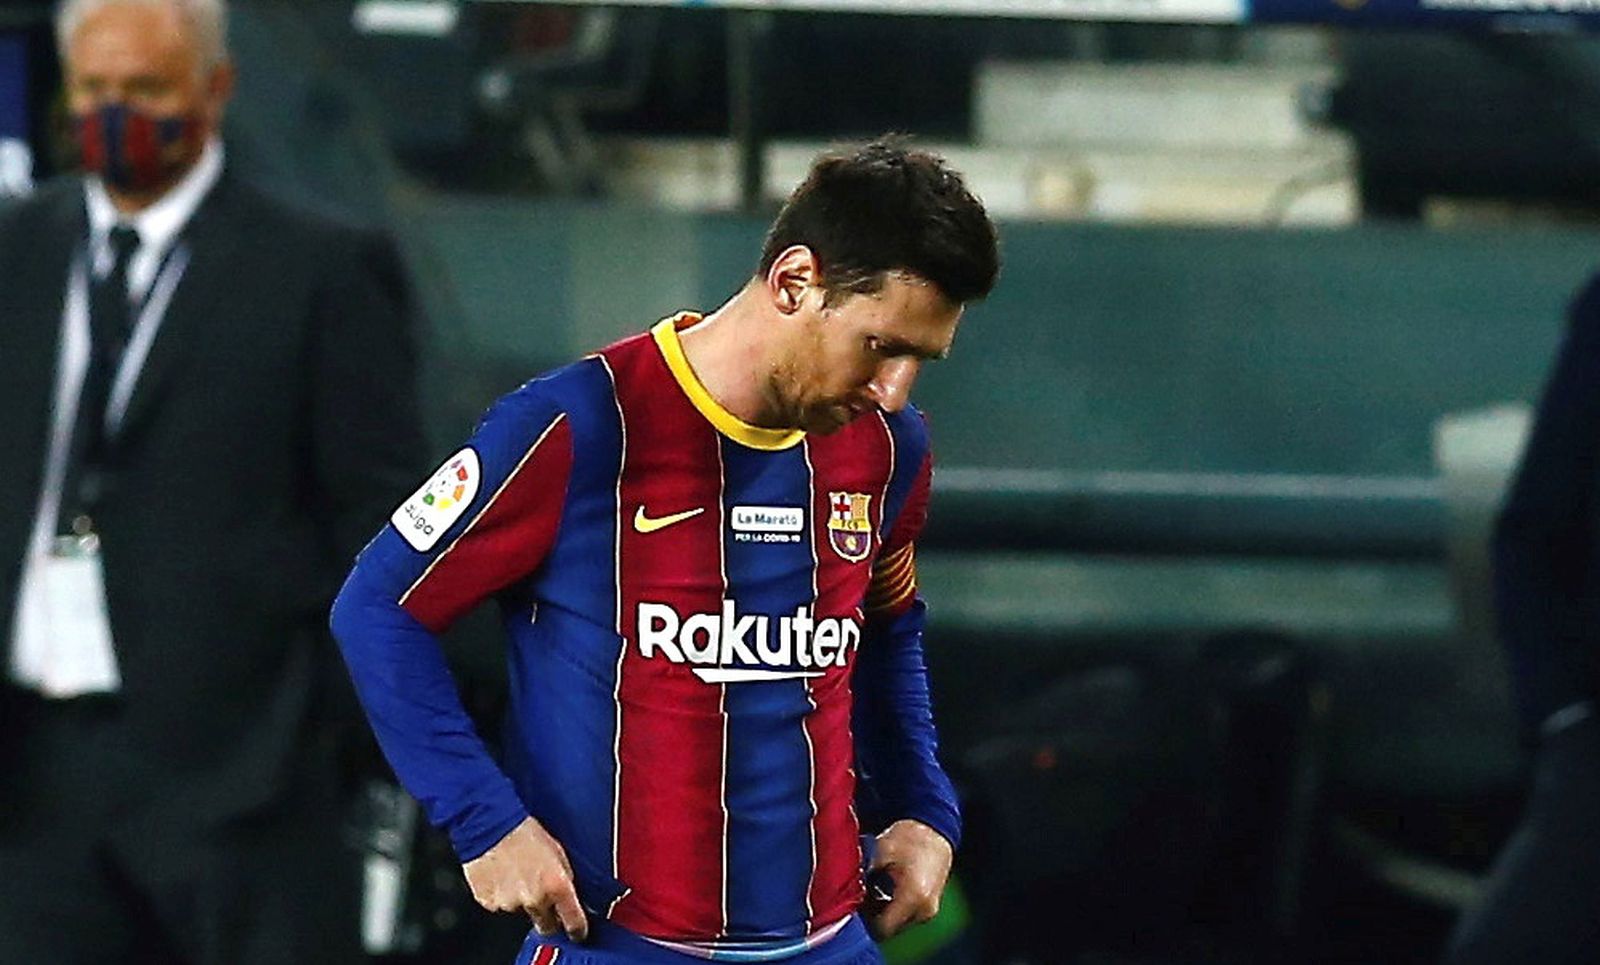 epa08894201 FC Barcelona's striker Leo Messi reacts at the end of the Spanish LaLiga soccer match between FC Barcelona and Valencia CF held at Camp Nou Stadium in Barcelona, Spain, 19 December 2020.  EPA/Enric Fontcuberta